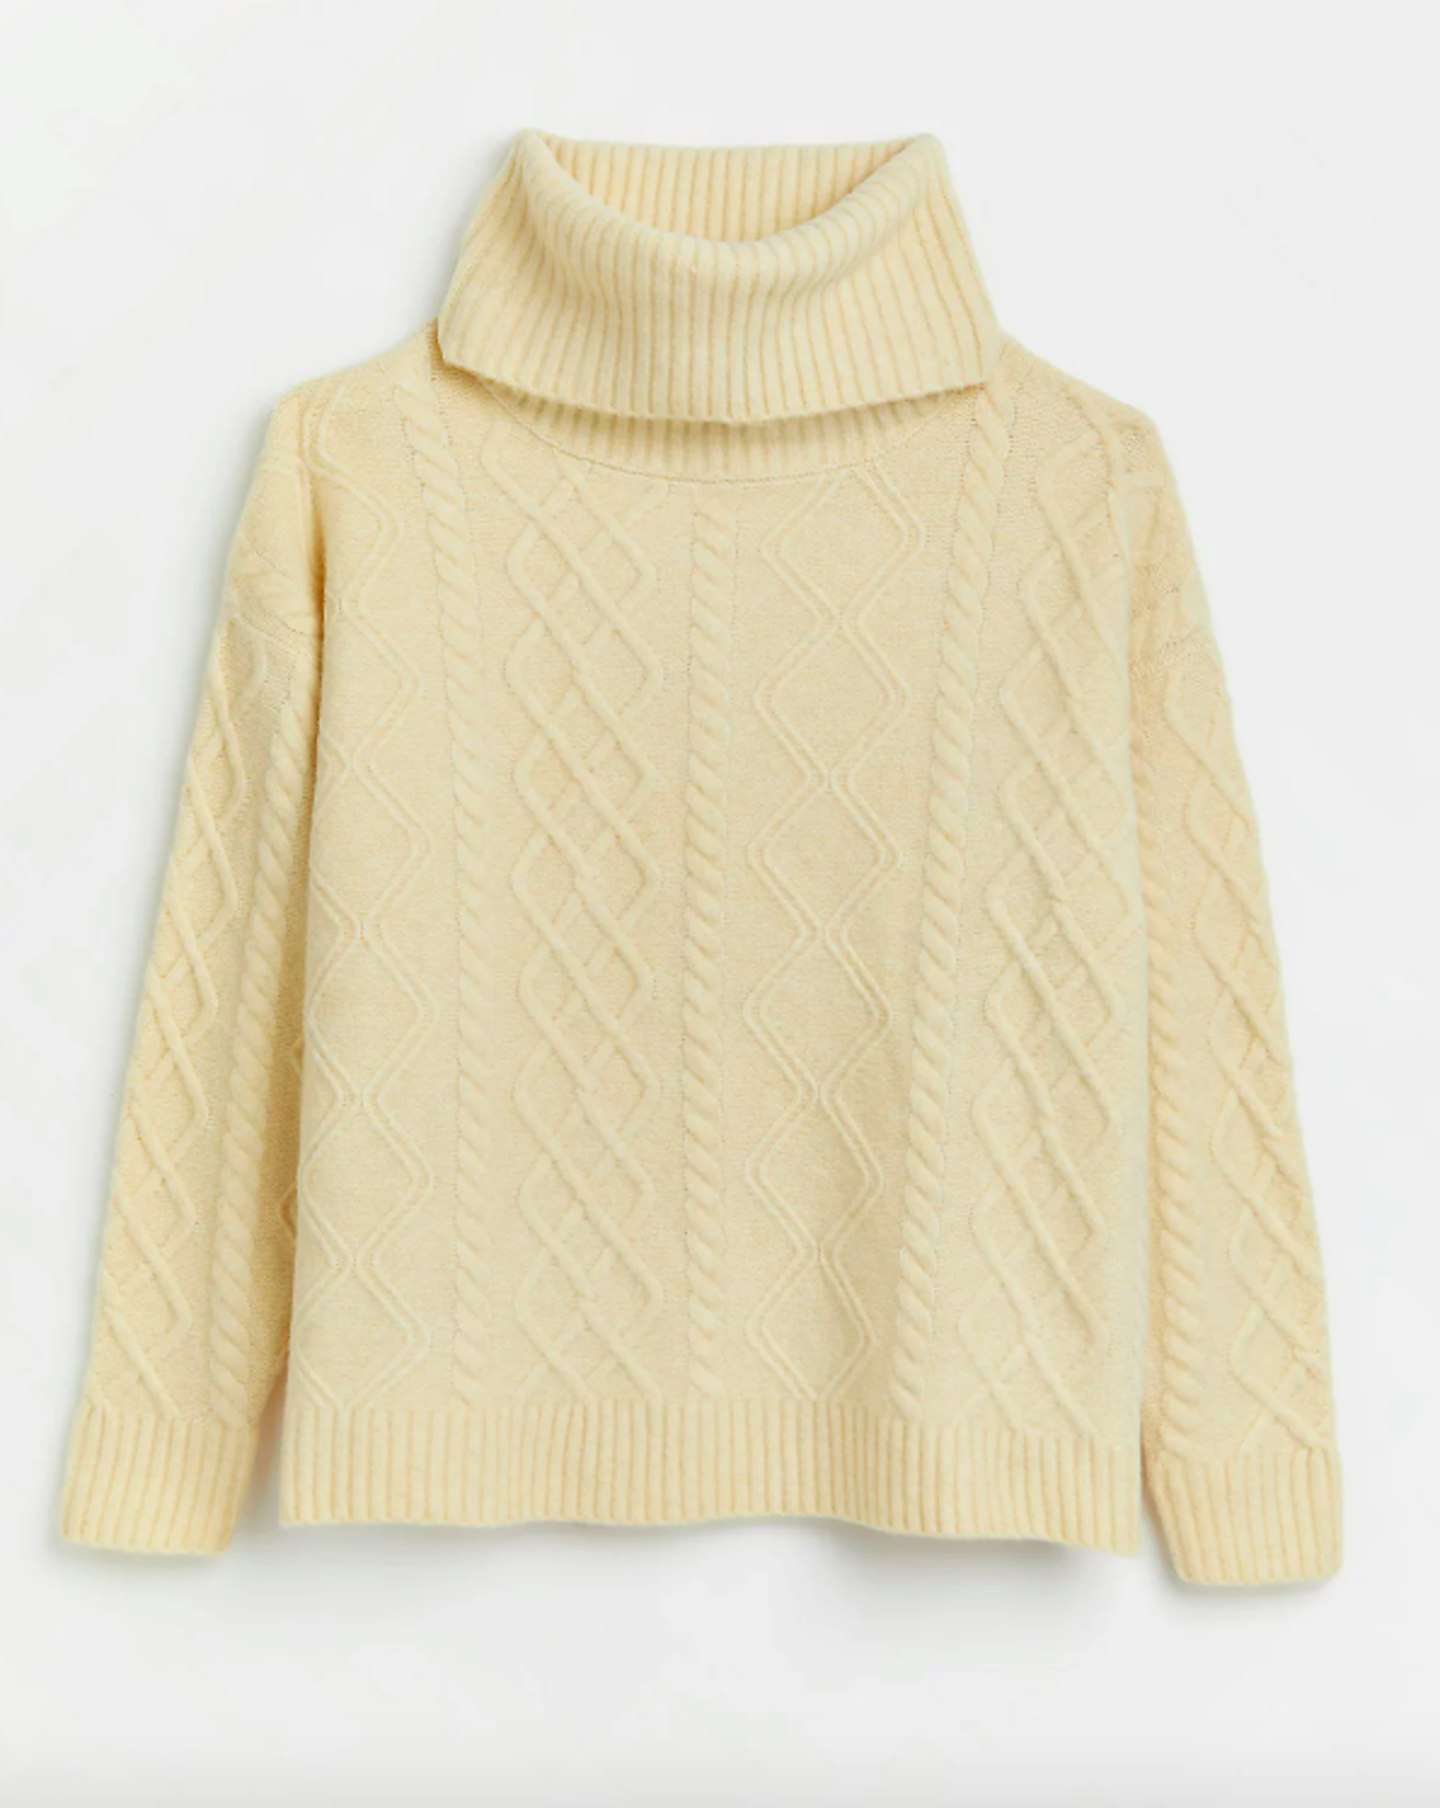 Cream Cable-Knit Jumper, WAS £48 NOW £35